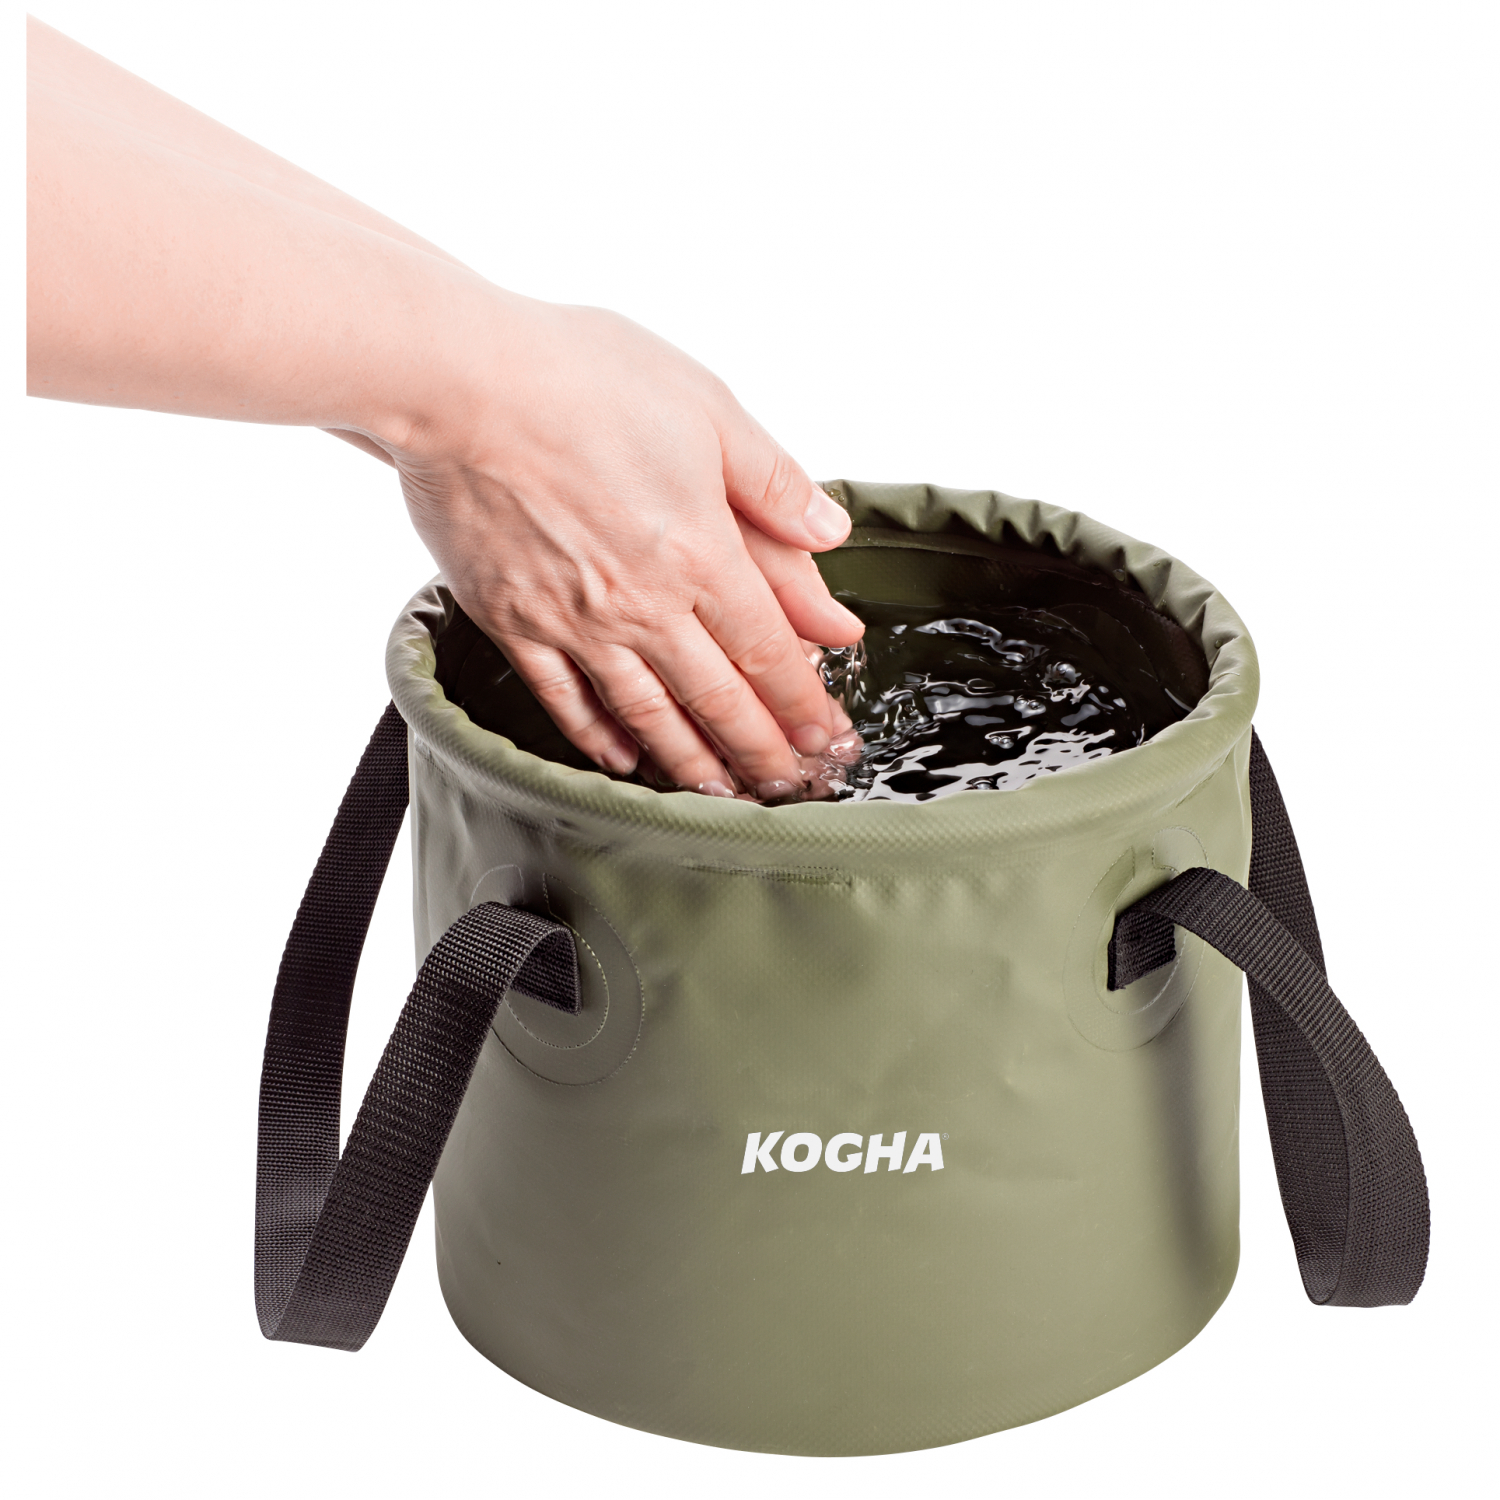 Kogha Foldable Bucket Multi Use at low prices